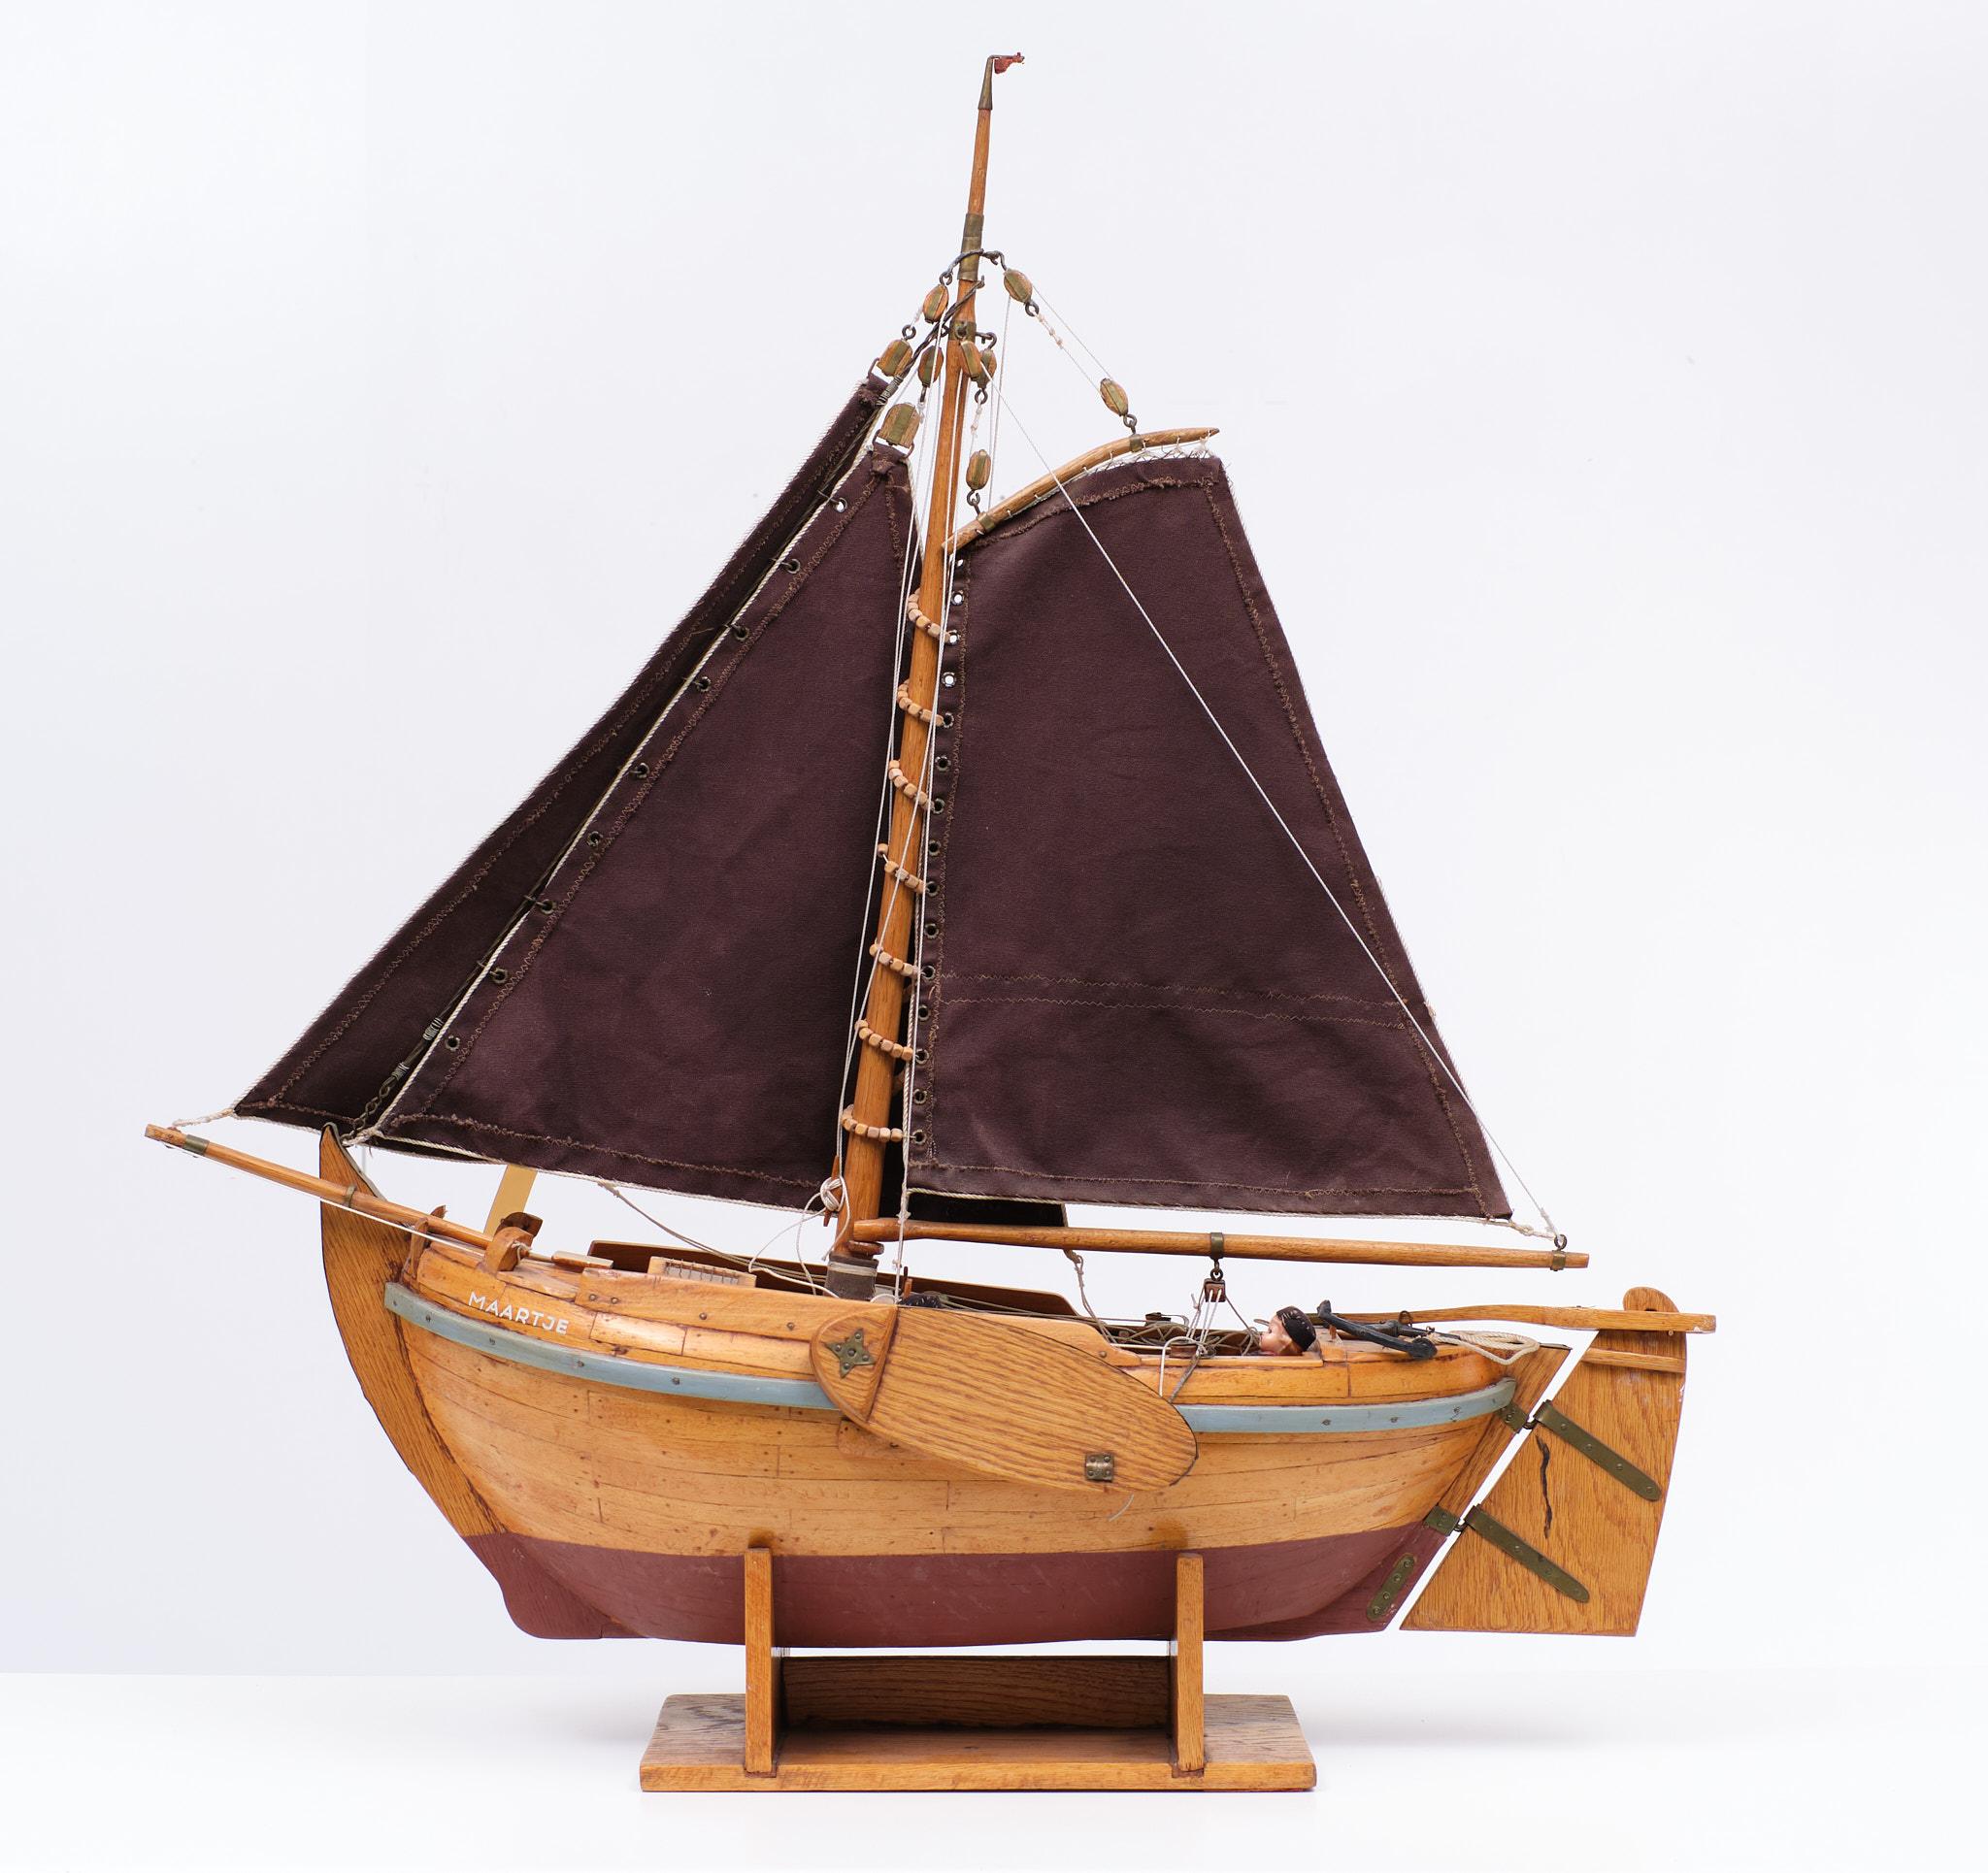 The botter is a type of flat-bottomed fishing vessel that was developed in Holland. Most of the towns in Holland had their own types of ships that had emerged over a long time.
This model is handmade .Image how muts time this has taken . It was